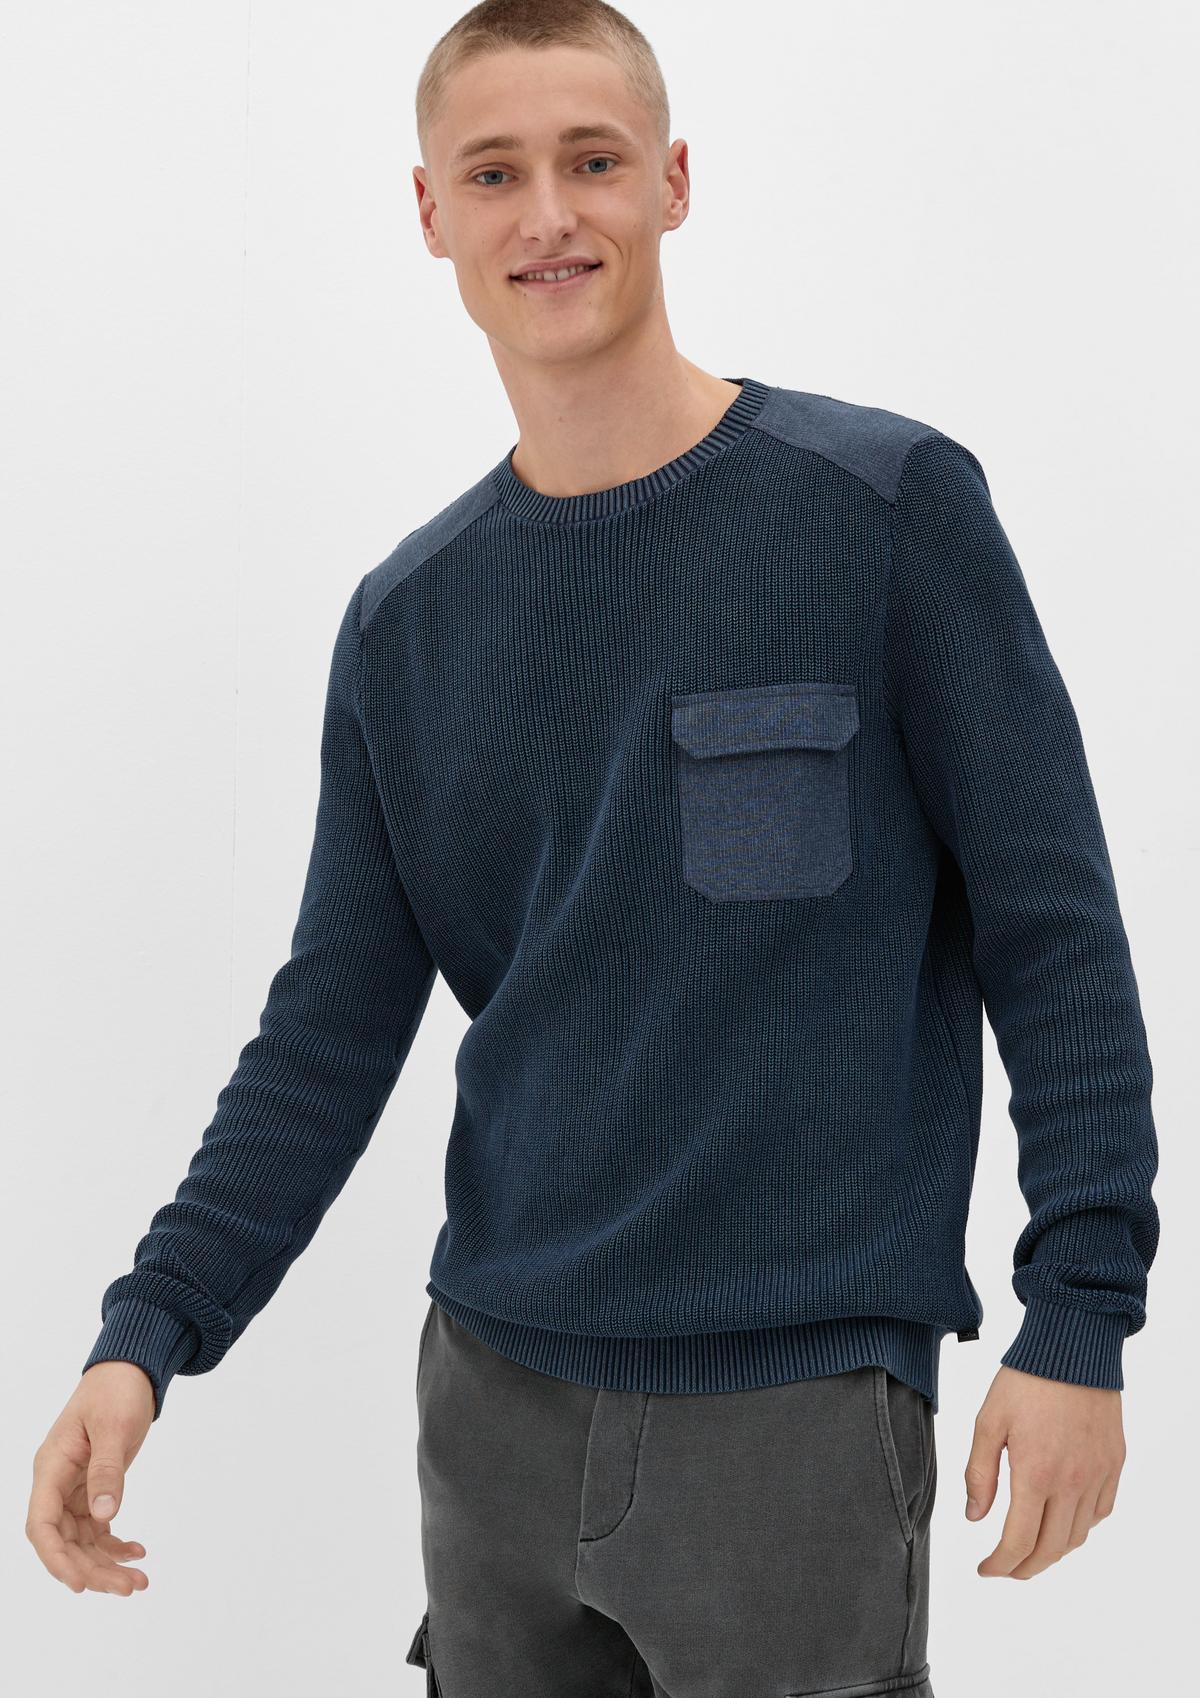 Knitted jumper with a garment dye